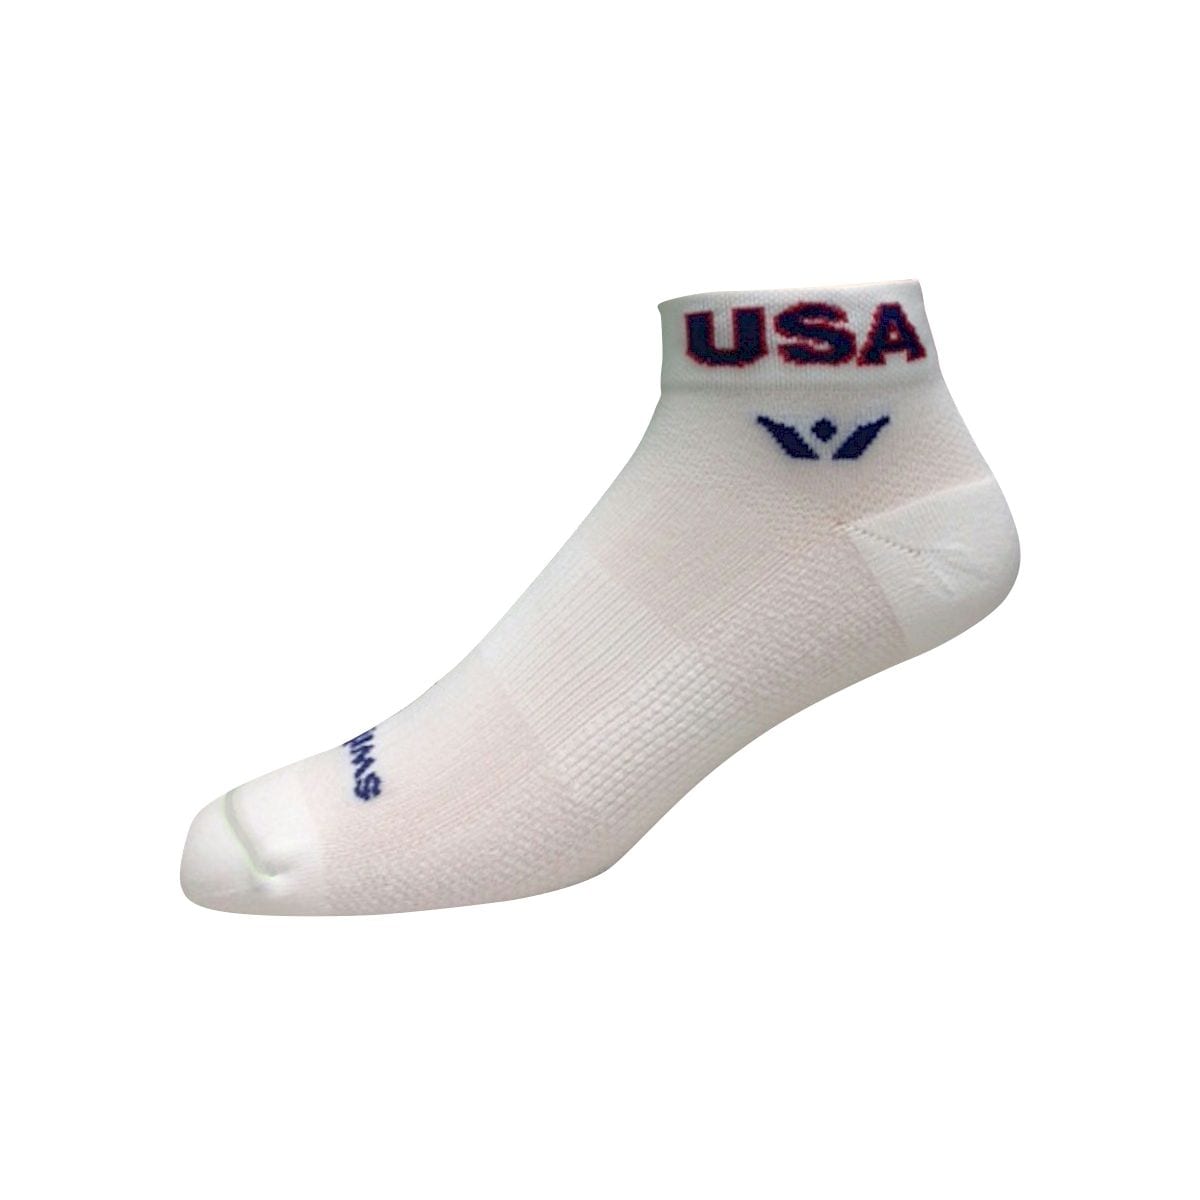 Swiftwick One Vision Men's